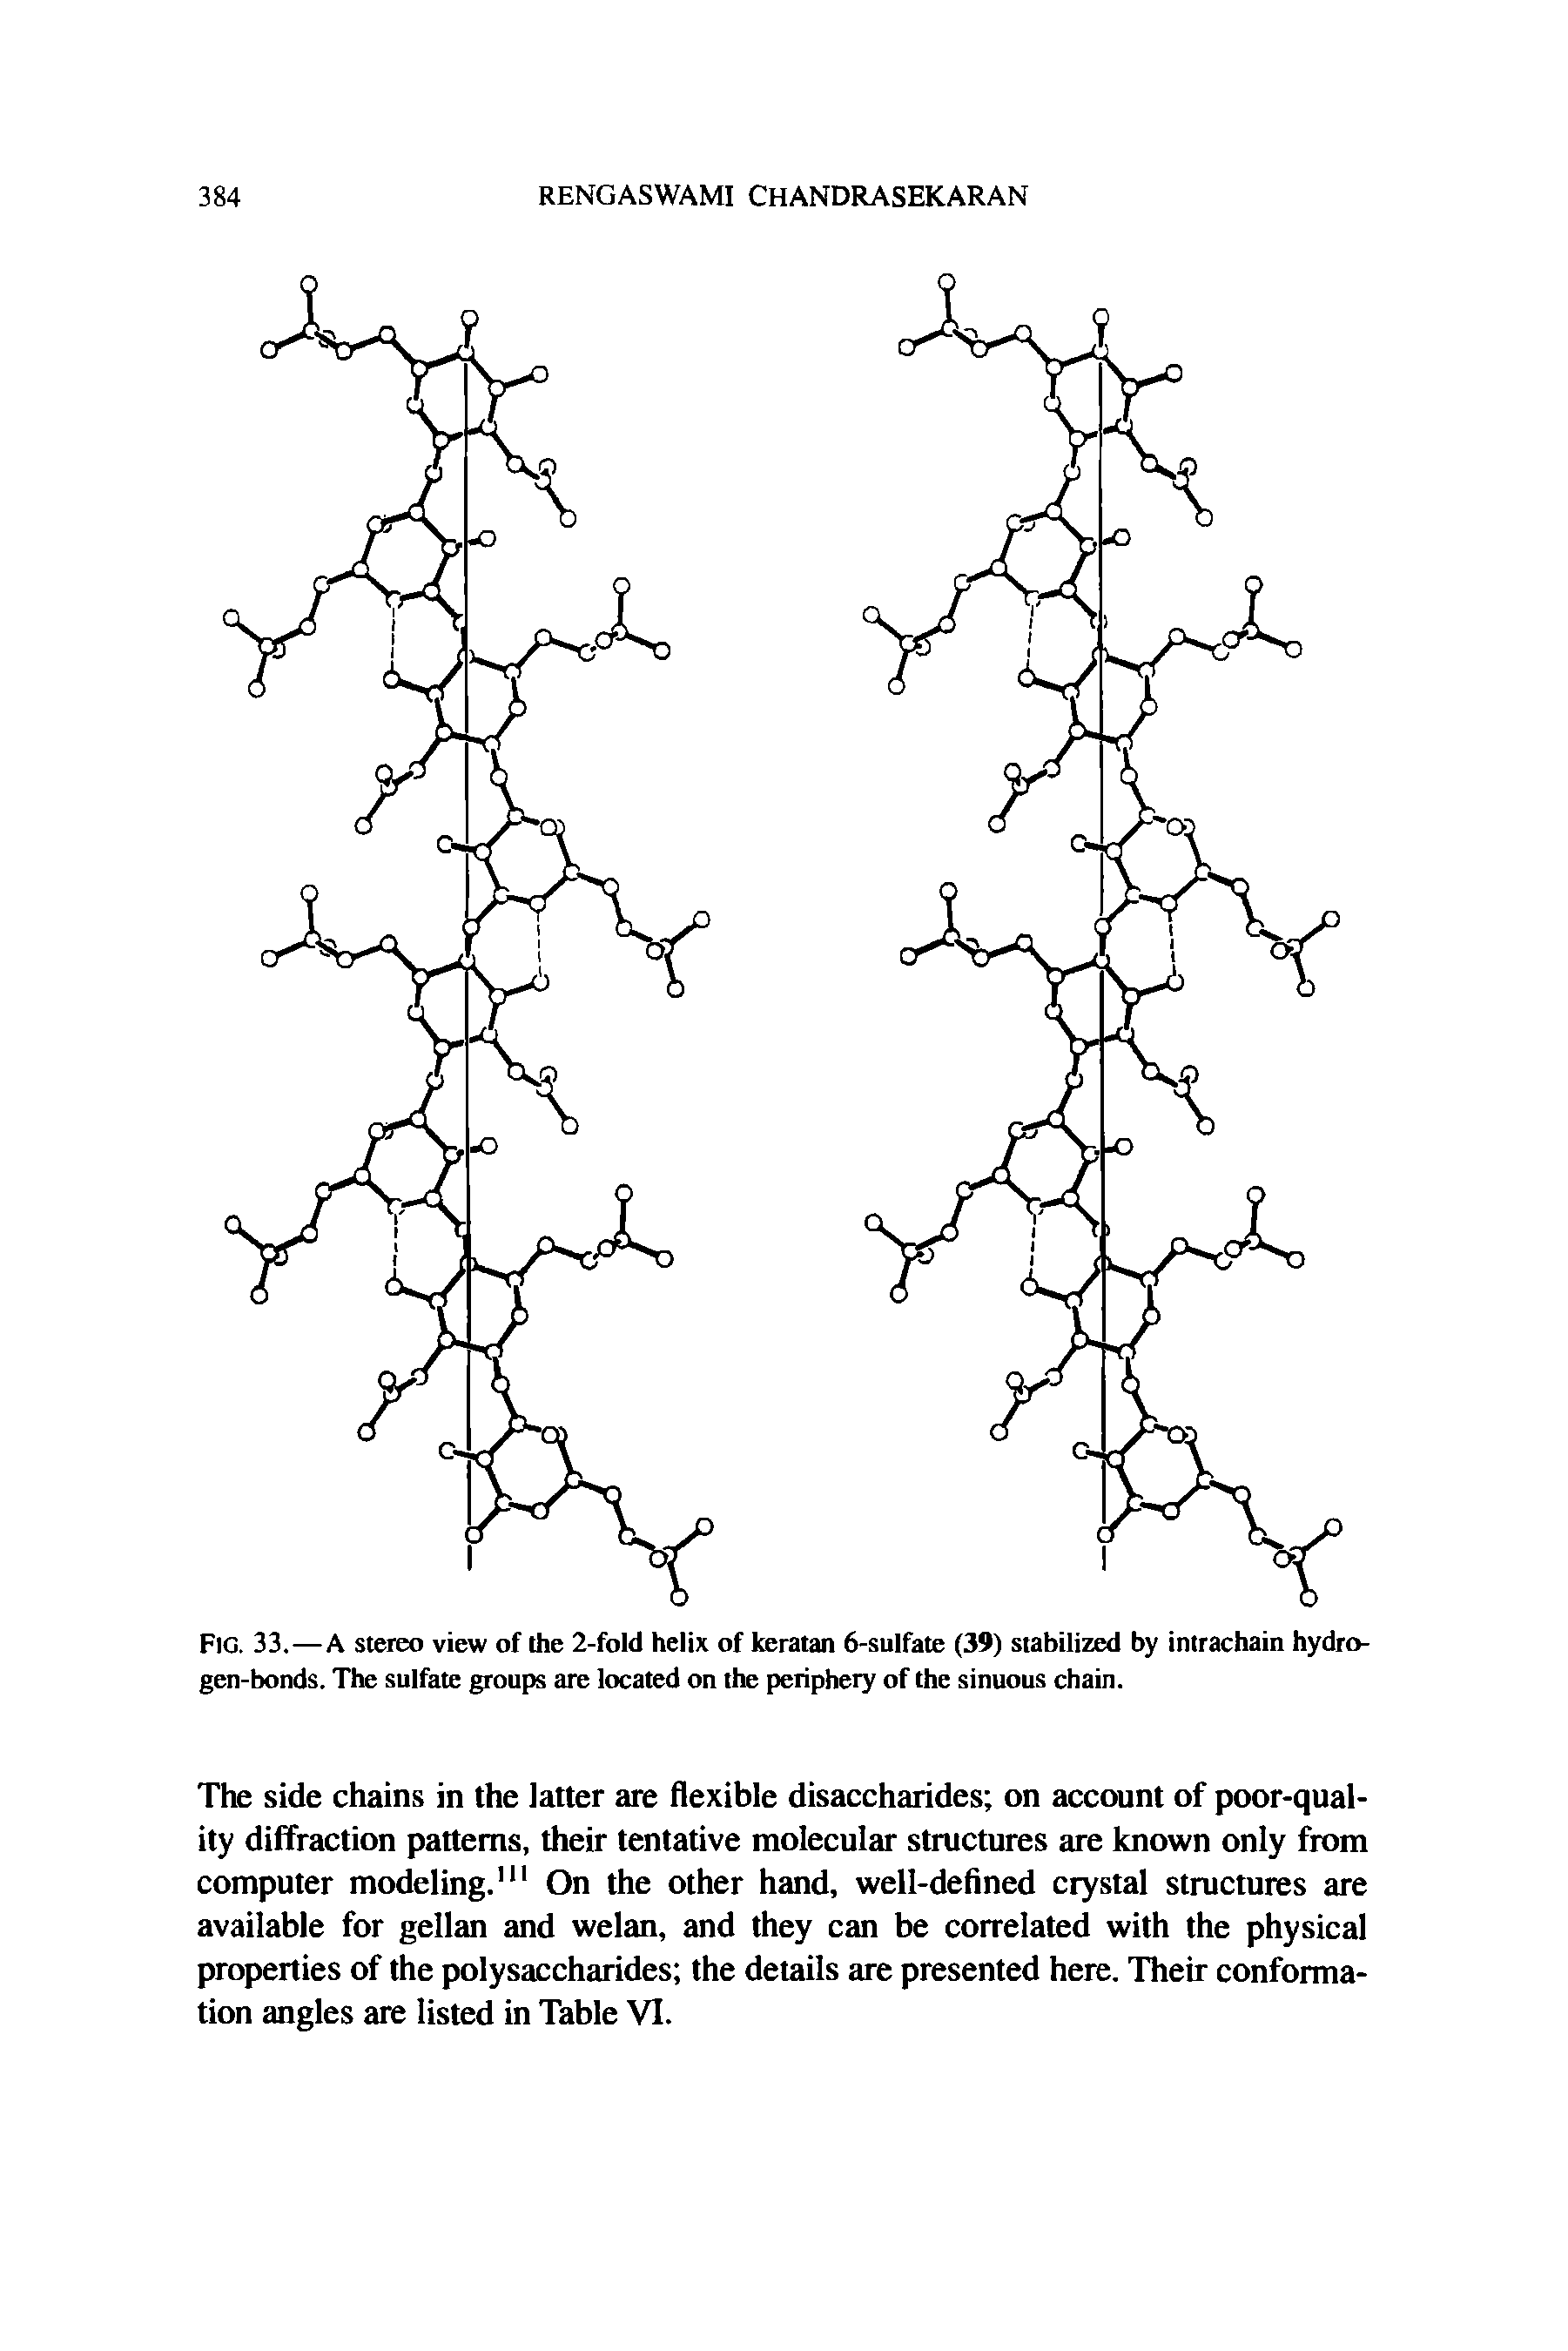 Fig. 33.—A stereo view of the 2-fold helix of keratan 6-sulfate (39) stabilized by intrachain hydrogen-bonds. The sulfate groups are located on the periphery of the sinuous chain.